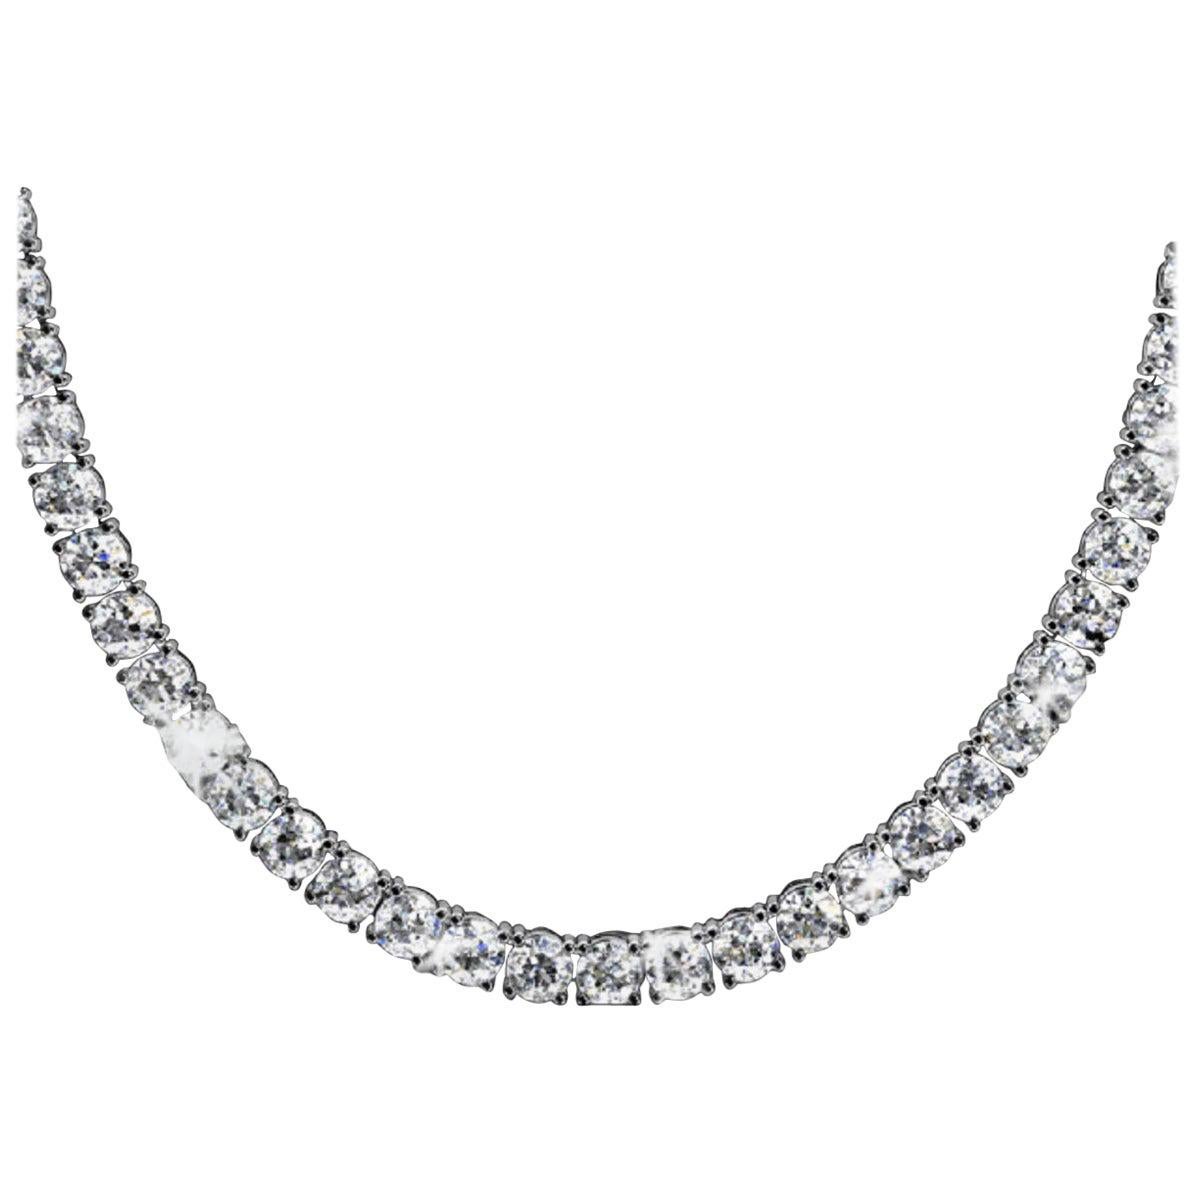 42 Carat Natural Untreated Diamond Tennis Necklace 18 Carat White Gold For Sale